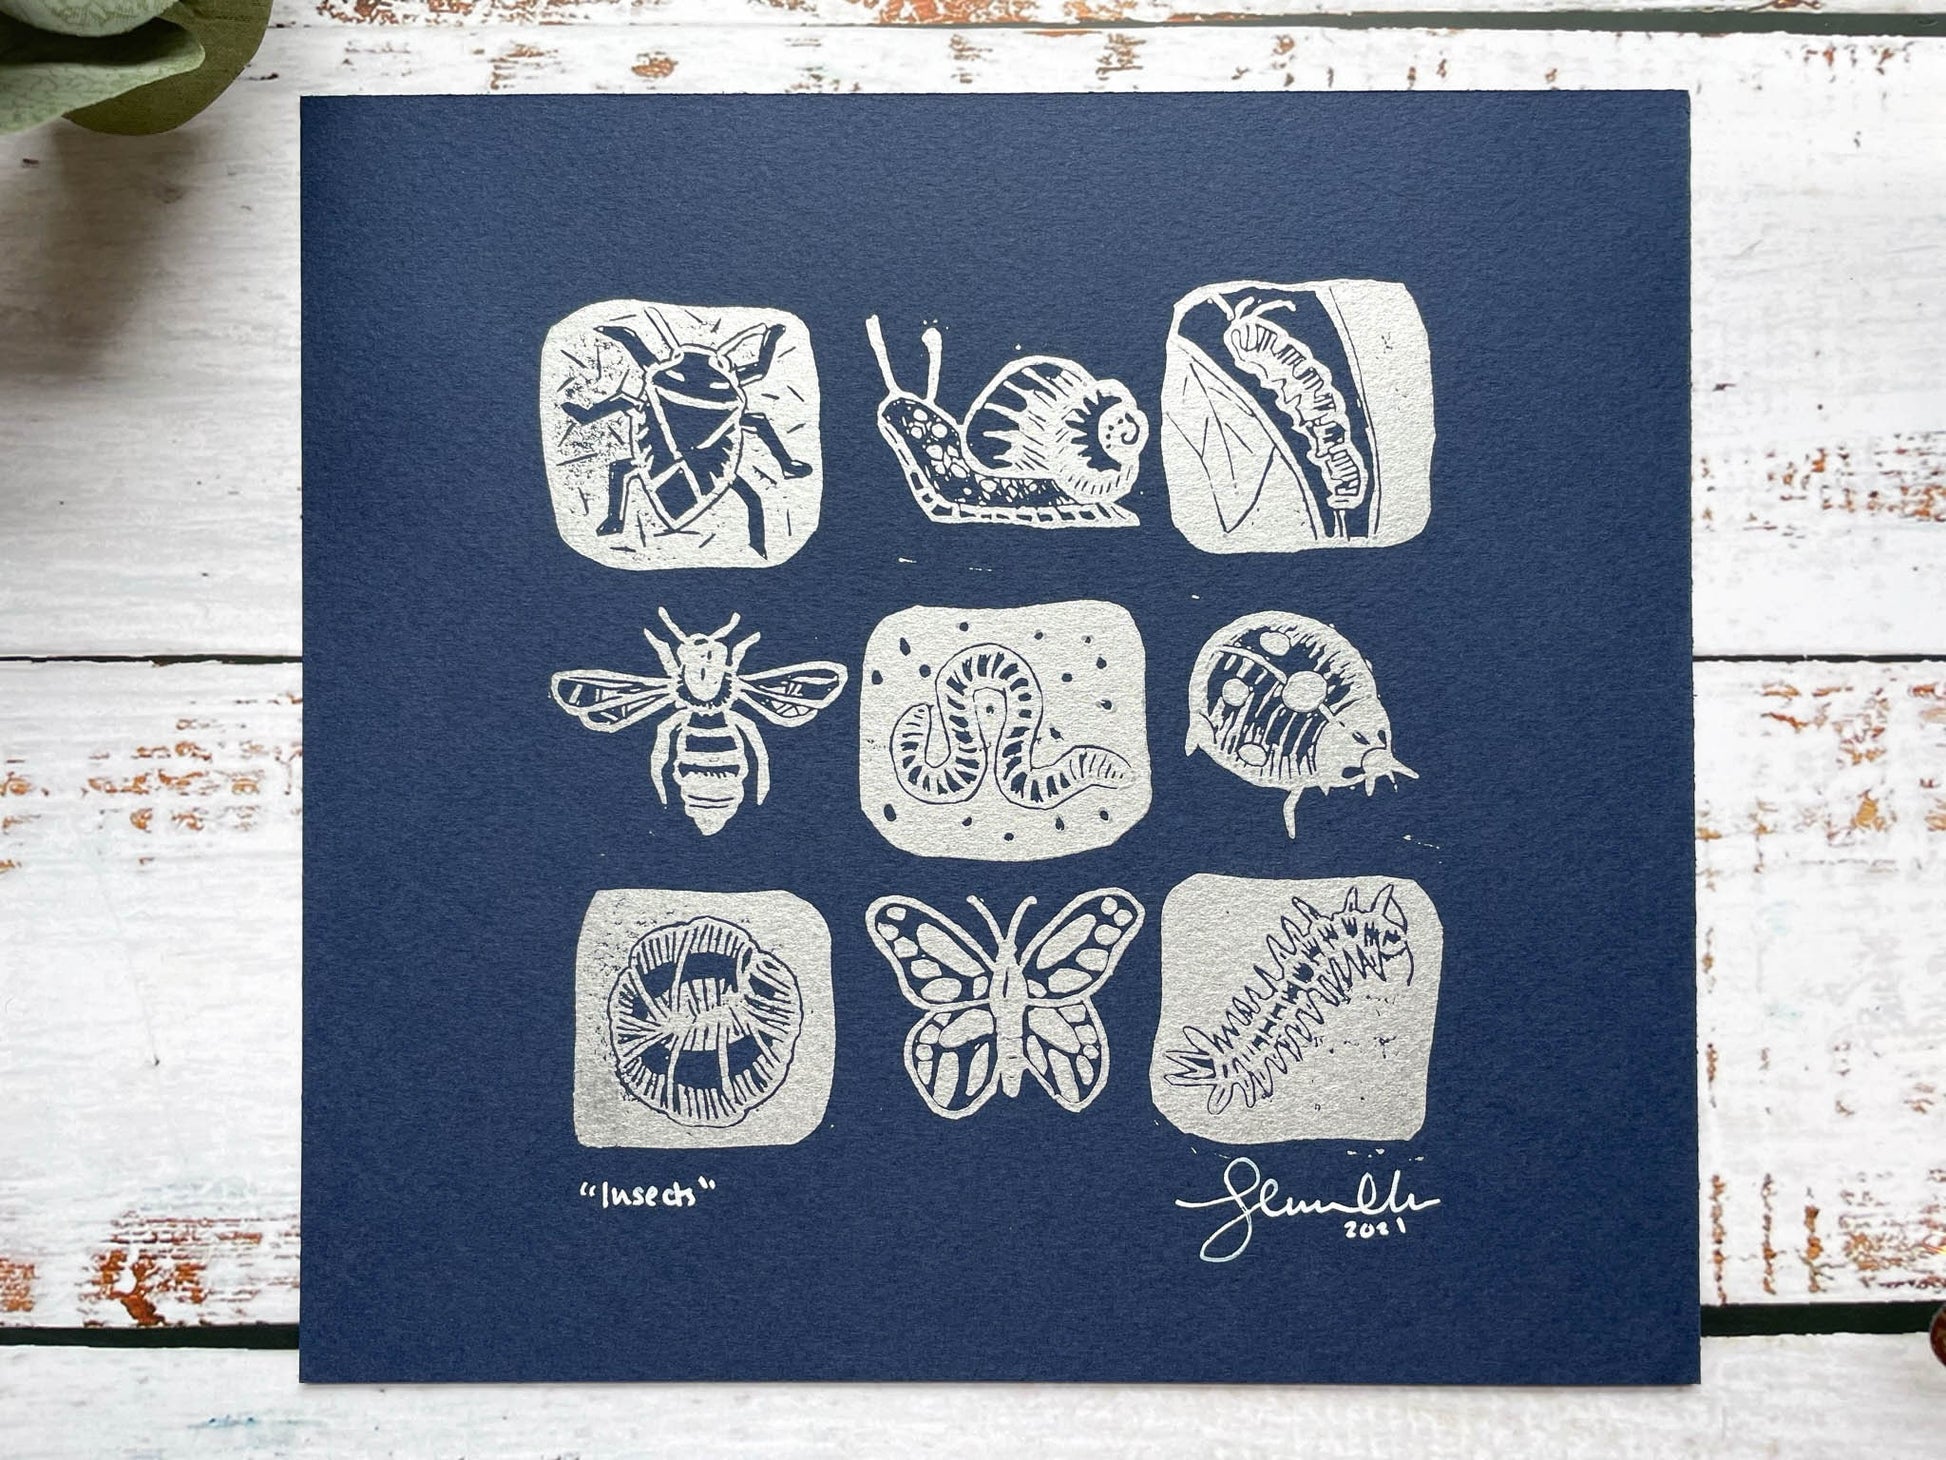 A lino print of a 3 x 3 grid of mini-beasts in silver on blue